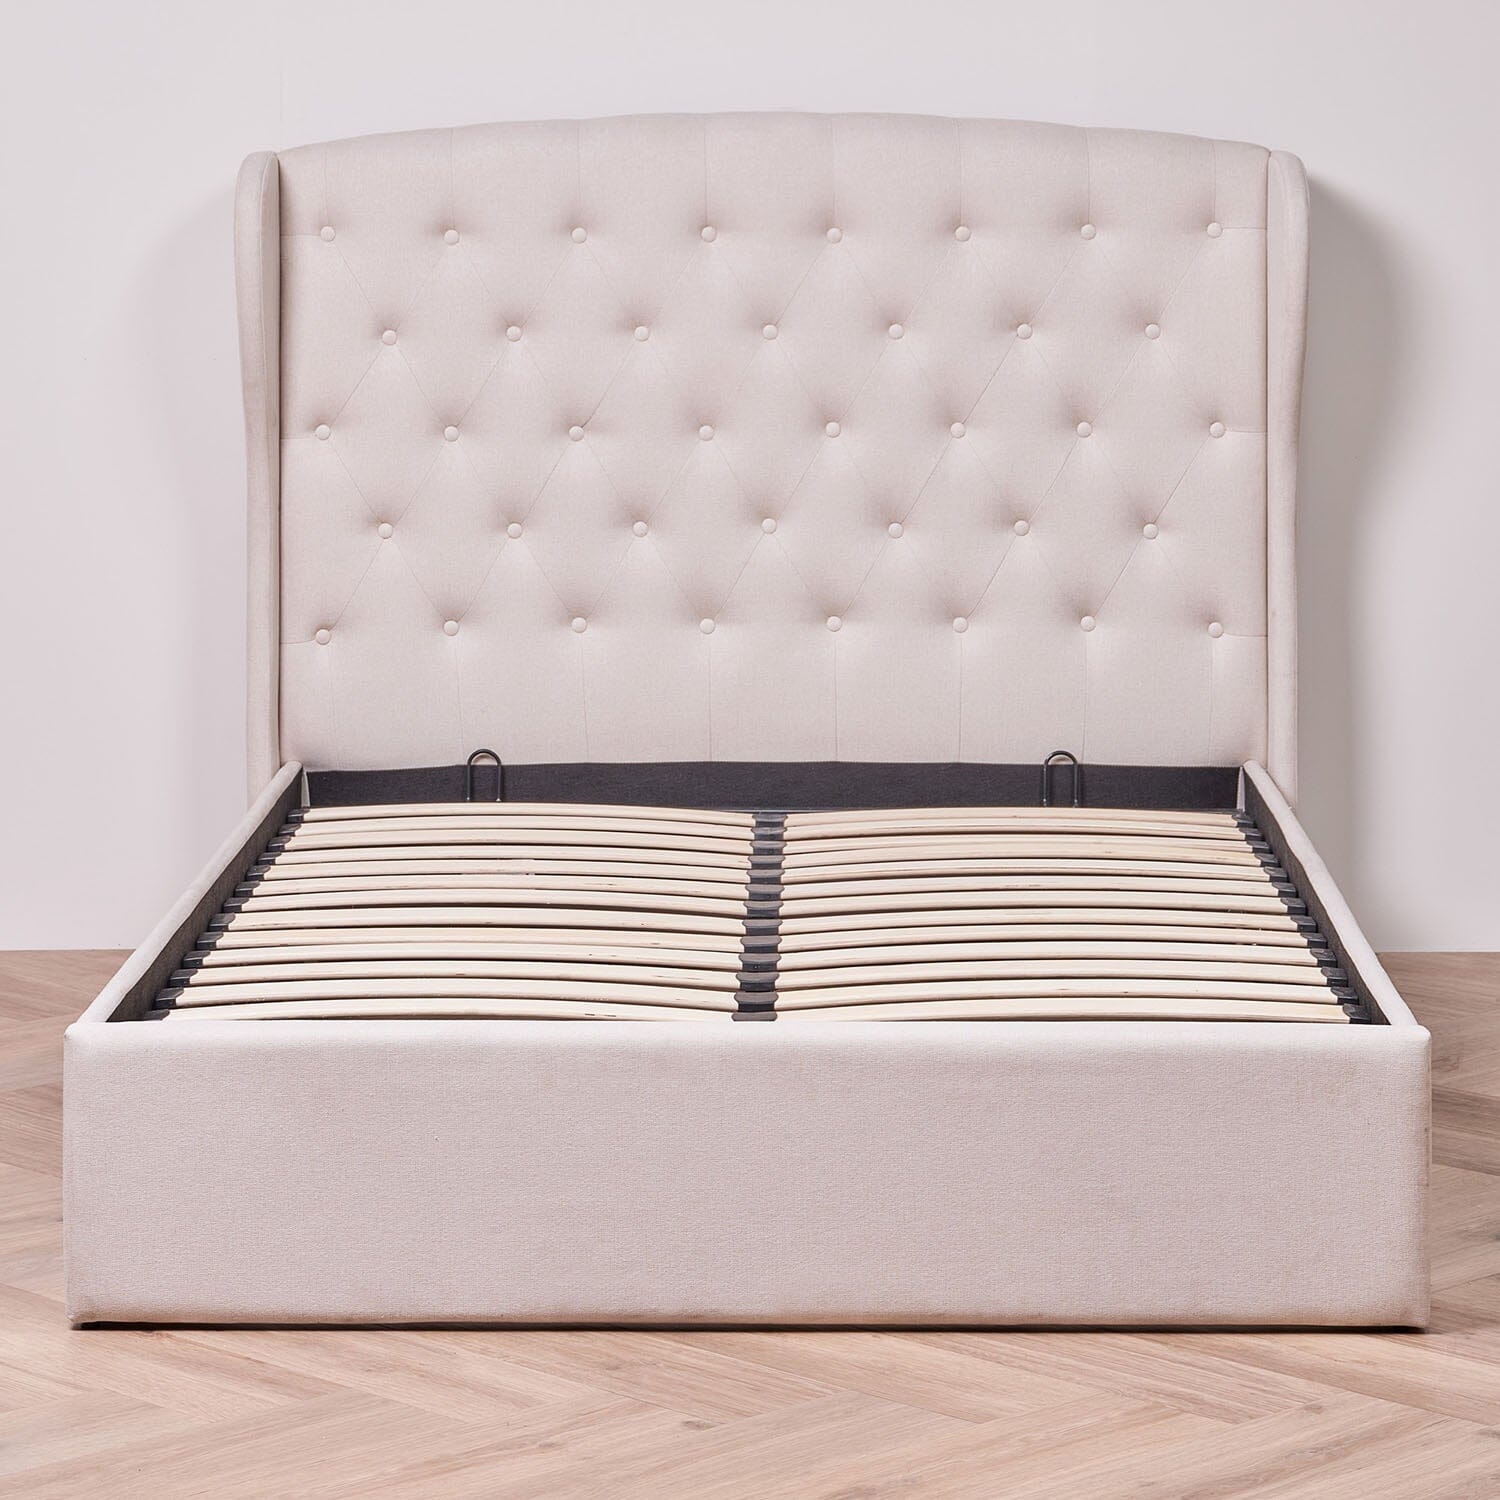 Daisy natural ottoman bed frame - Laura JAmes